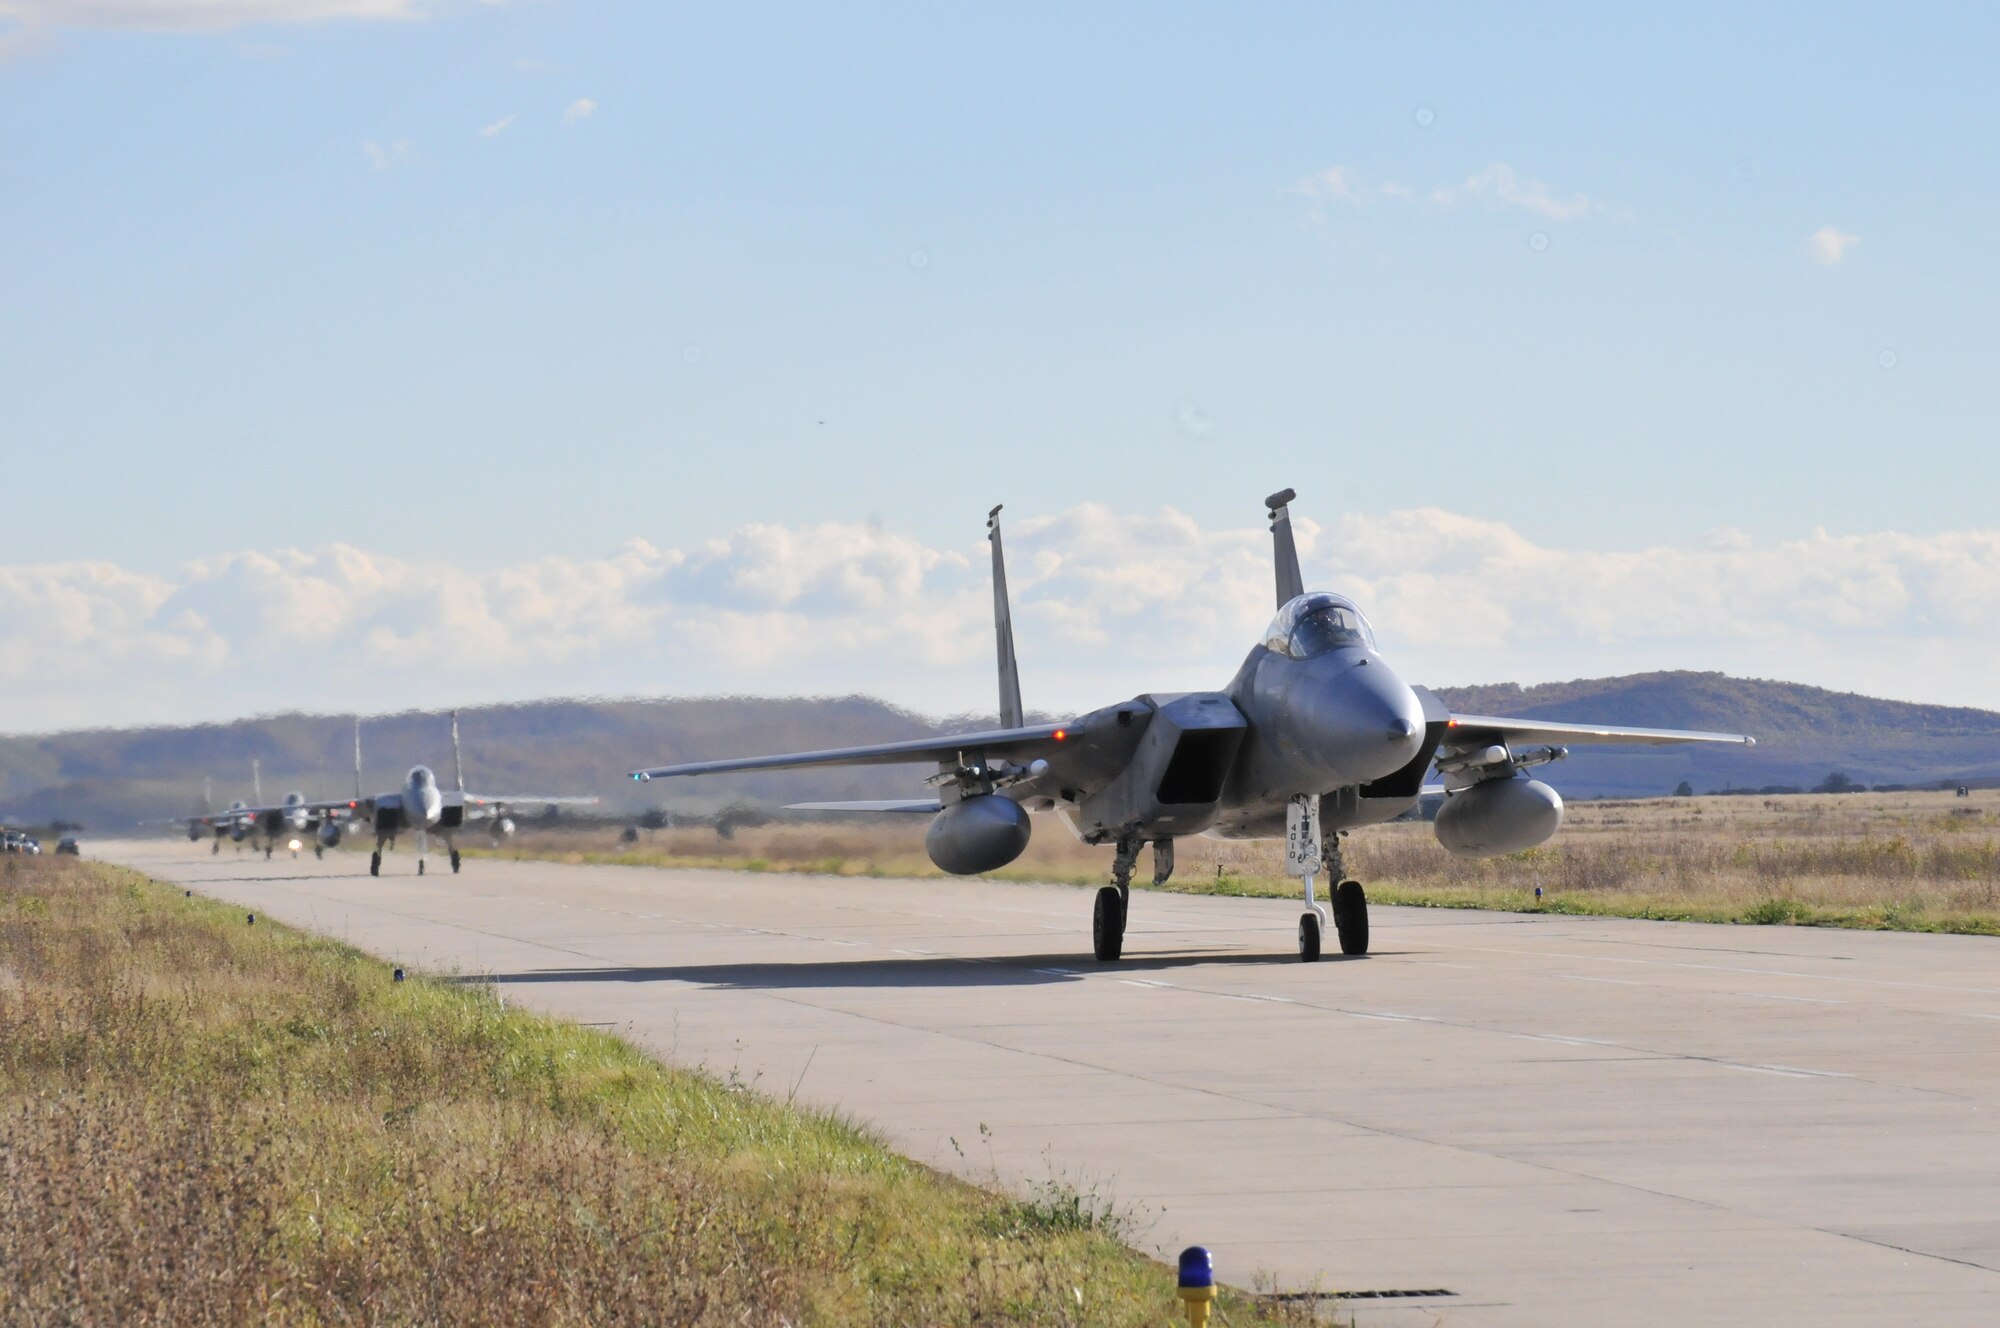 F-15C fighter aircraft taxi at Campia Turzii Air Base, Romania, Oct. 21. The aircraft, from the 493rd Fighter Squadron at RAF Lakenheath, England, came to Romania to participate in Operation Golden Lance, an exercise designed to build partnerships and increase interoperability between NATO allies. (U.S. Air Force photo/Senior Airman David Dobrydney)